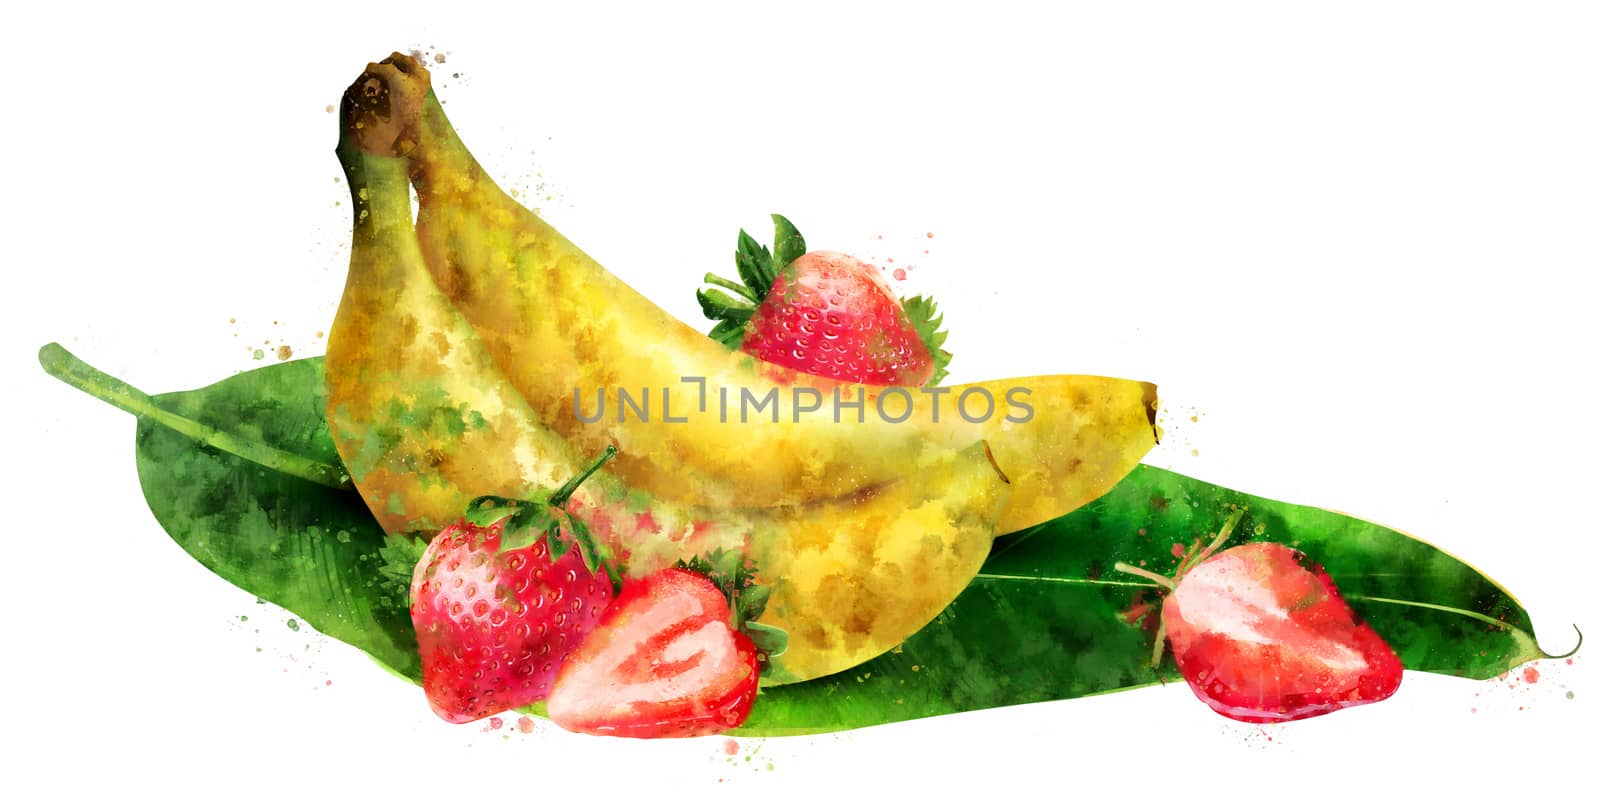 Banana and strawberry on white background. Watercolor illustration by ConceptCafe